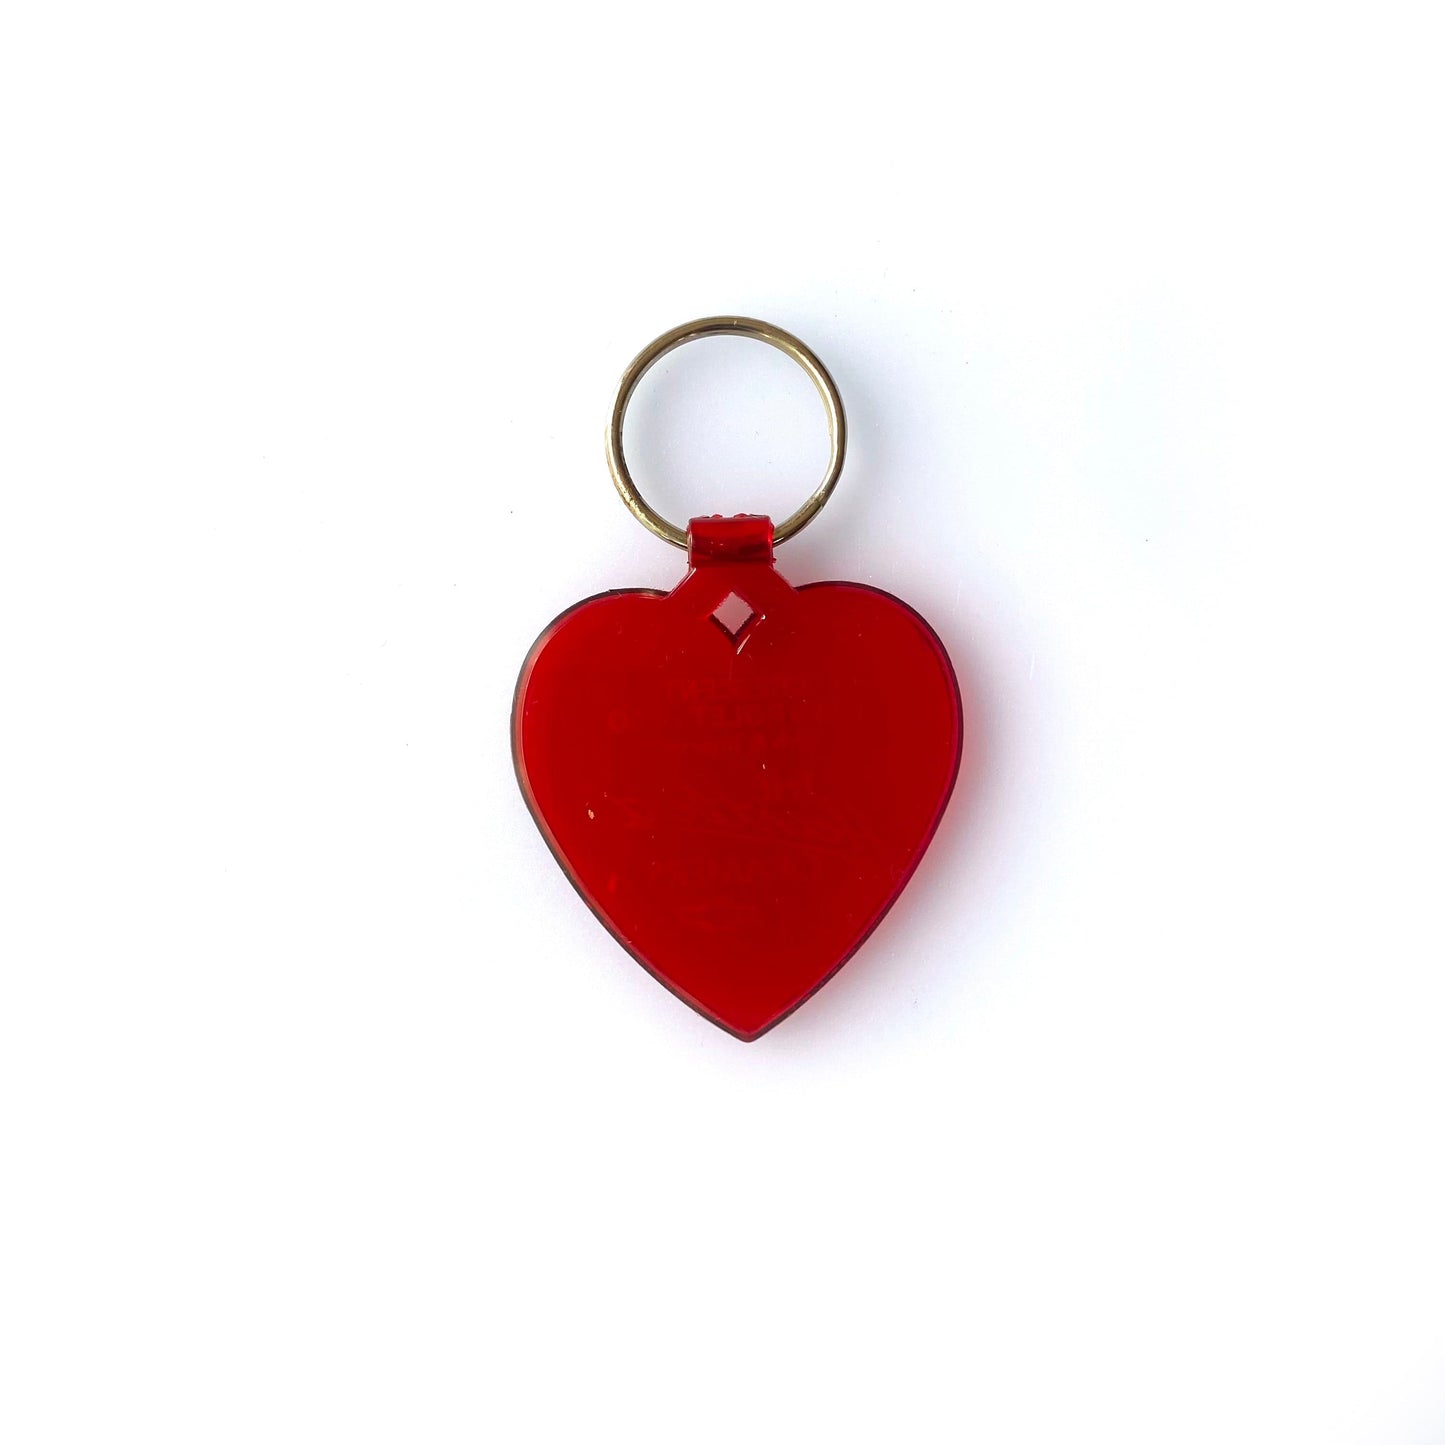 Vintage Crescent Chevrolet - Geo Keychain Key Ring Rubber Red Heart